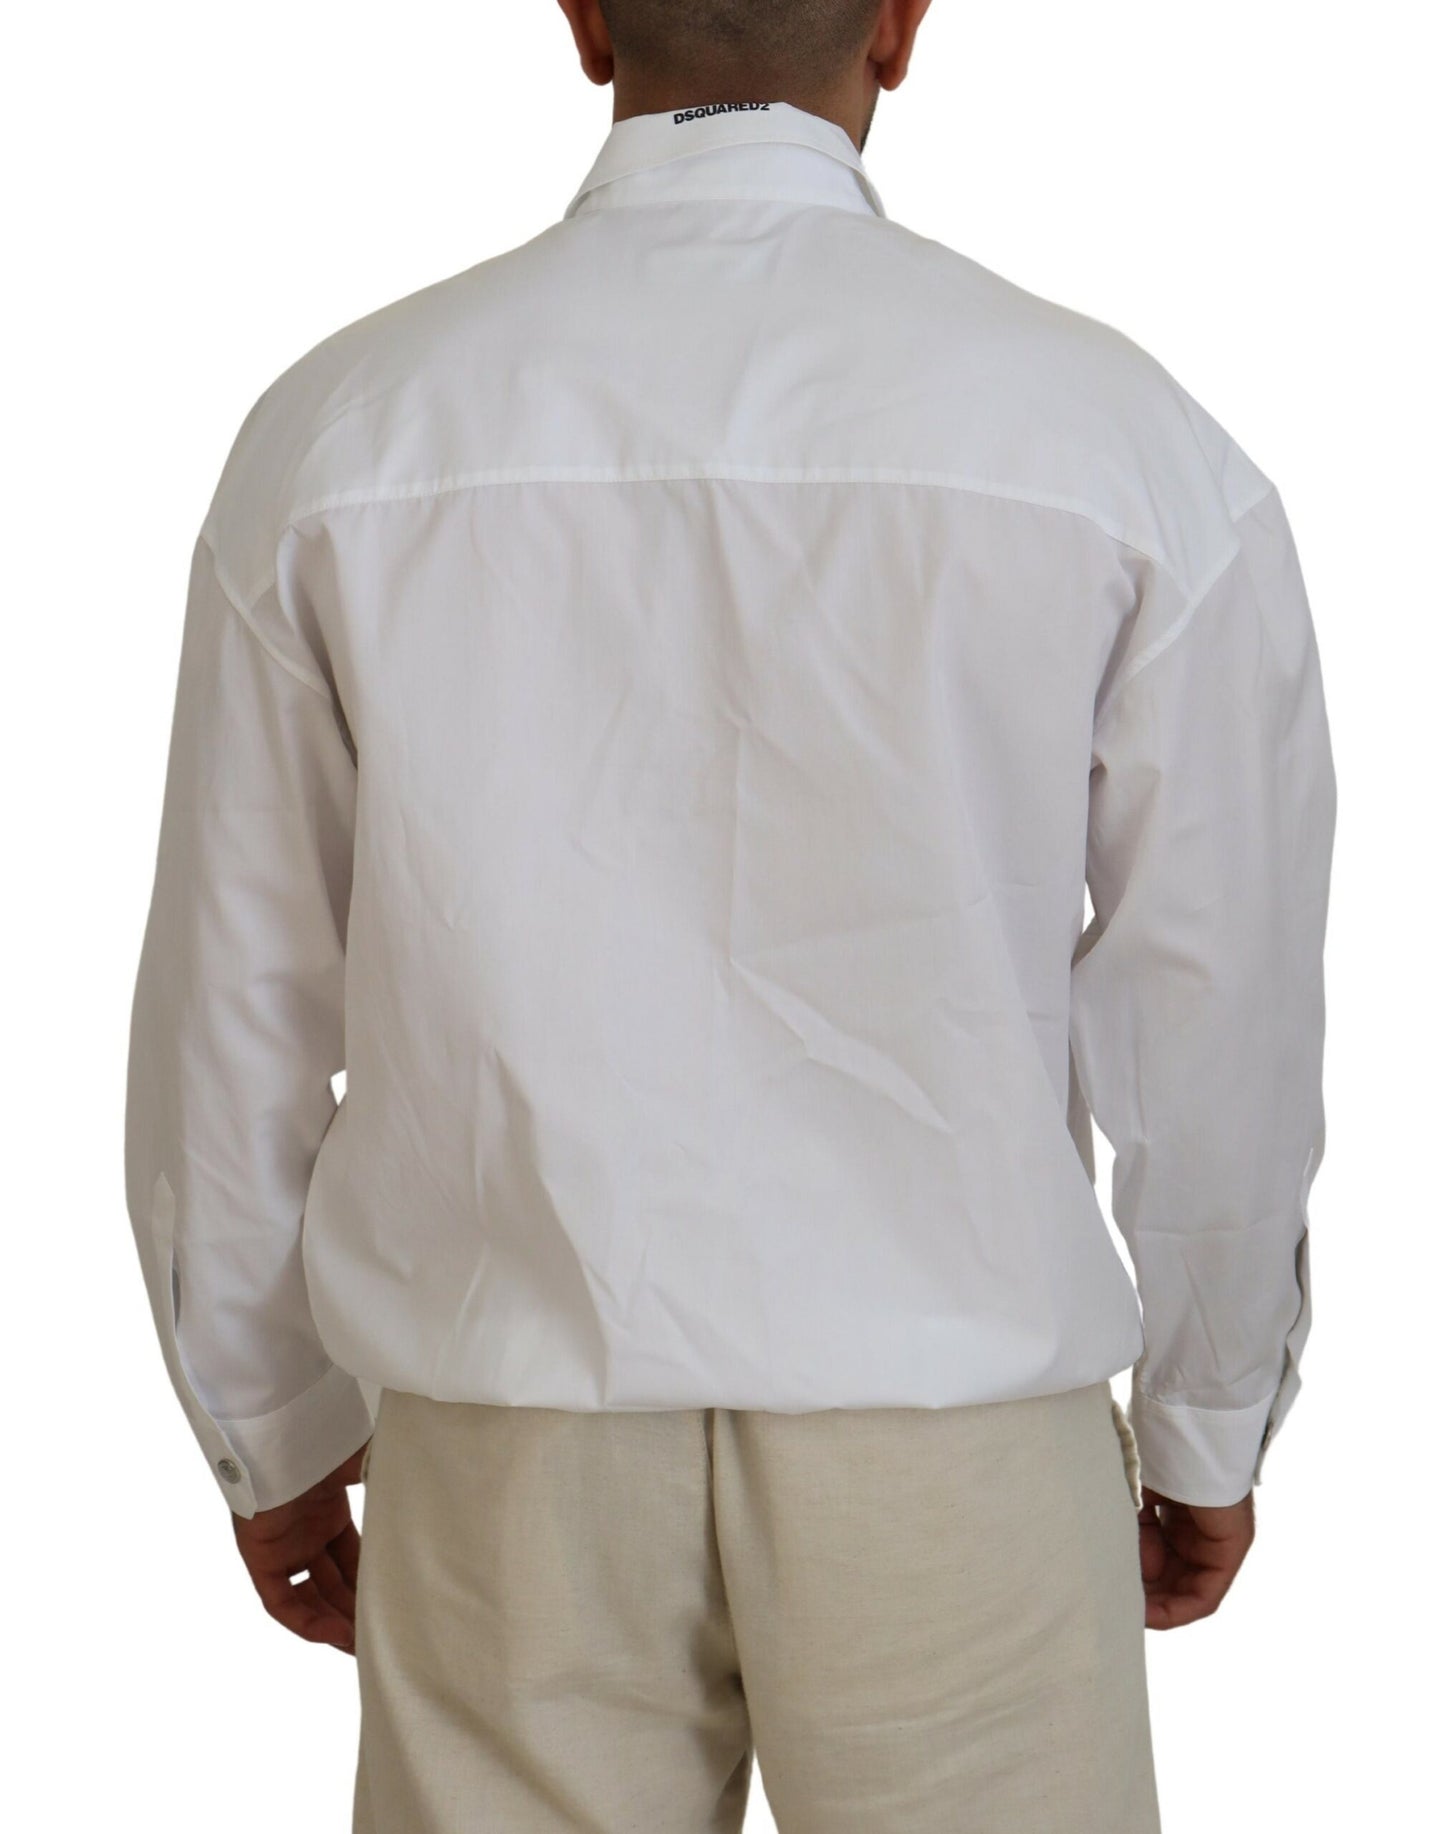 White Cotton Collared Casual Men Long Sleeves Jacket